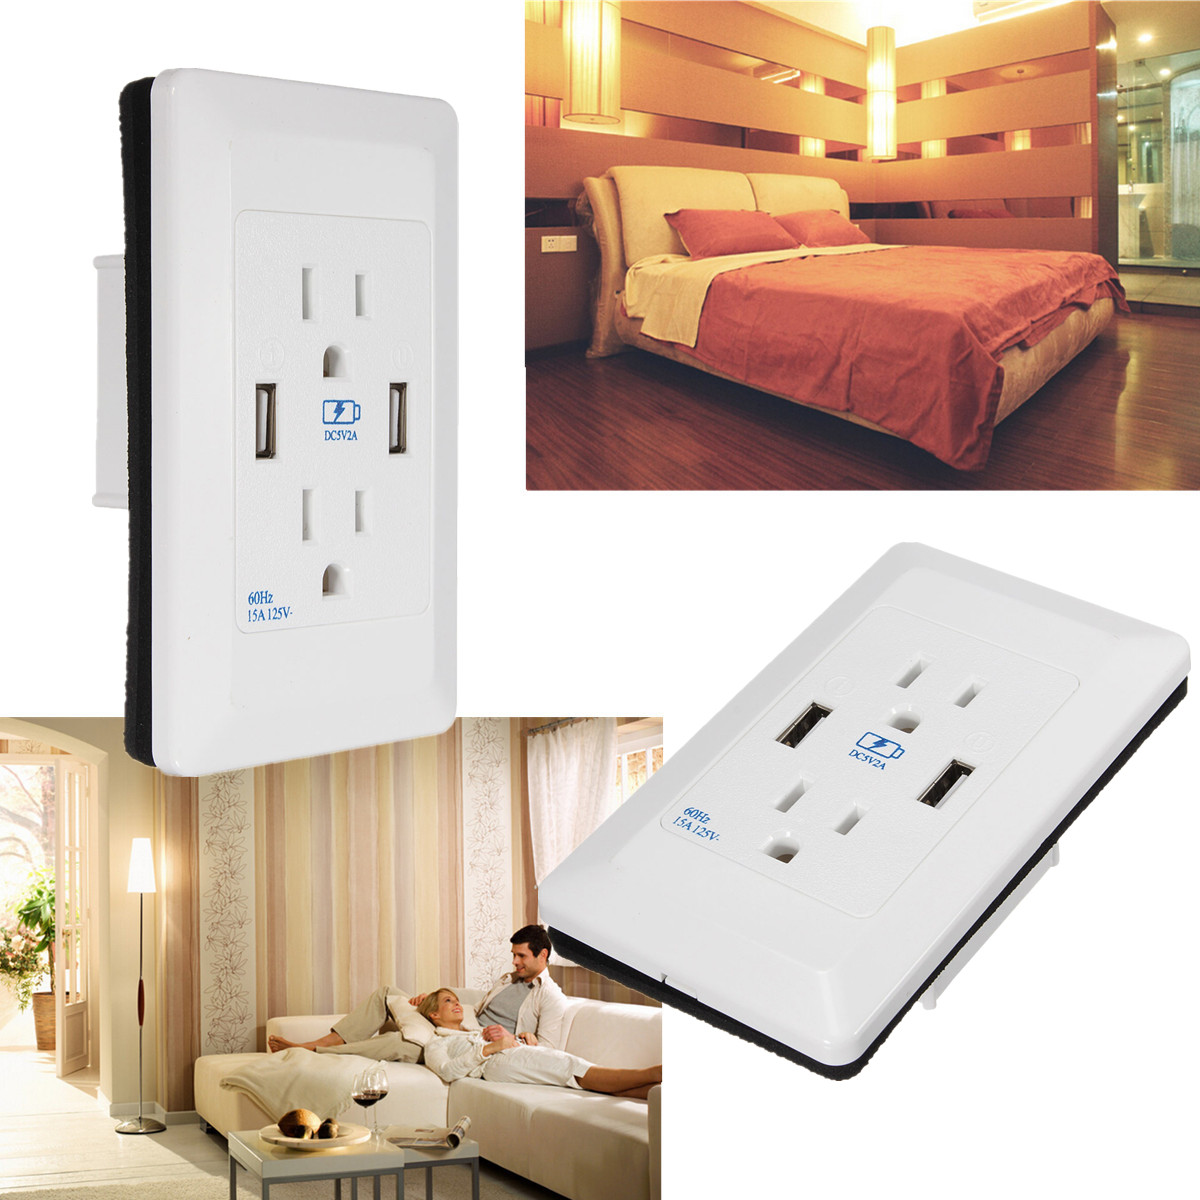 AC-Wall-Socket-Power-Adapter-Receptacle-2-Port-USB-Charger-Panel-Outlet-Plate-1951337-1